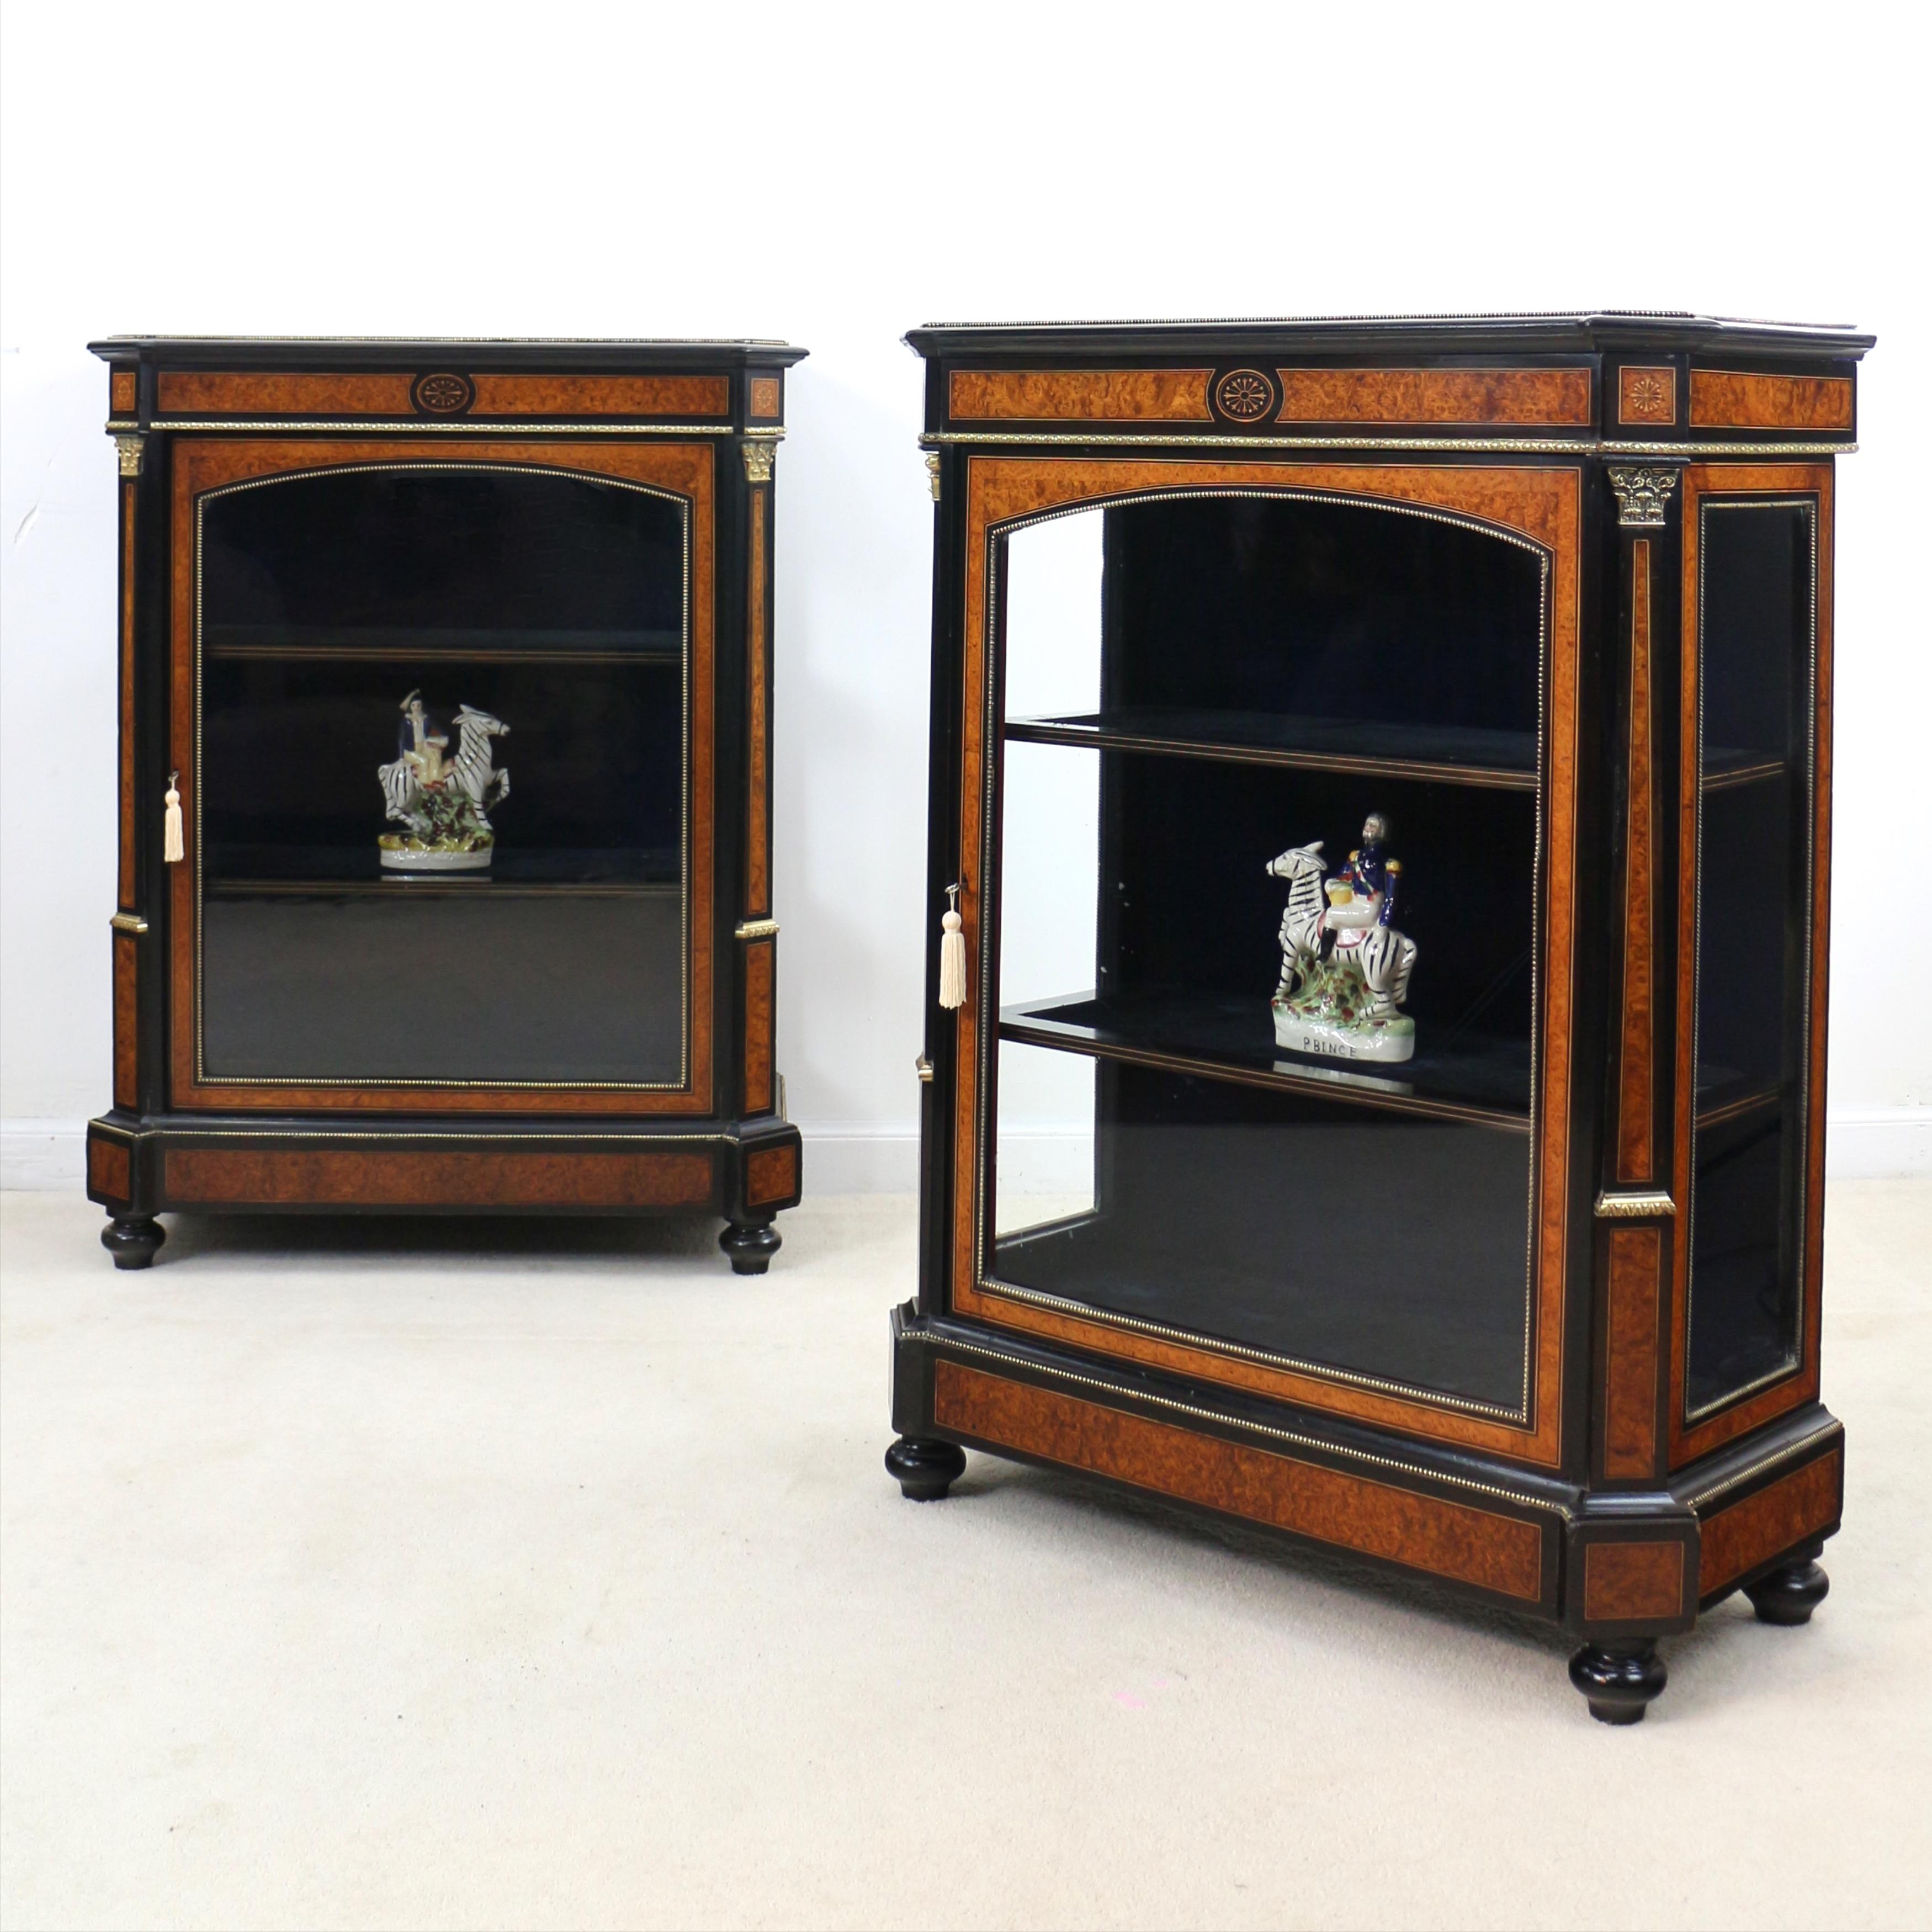 A beautiful pair of ebonised and amboyna inlaid pier cabinets dating to the mid Victorian period. Rarely found with glass sides this pair of cabinets are superbly made featuring finely inlaid paterae with beautifully figured amboyna inlays bounded